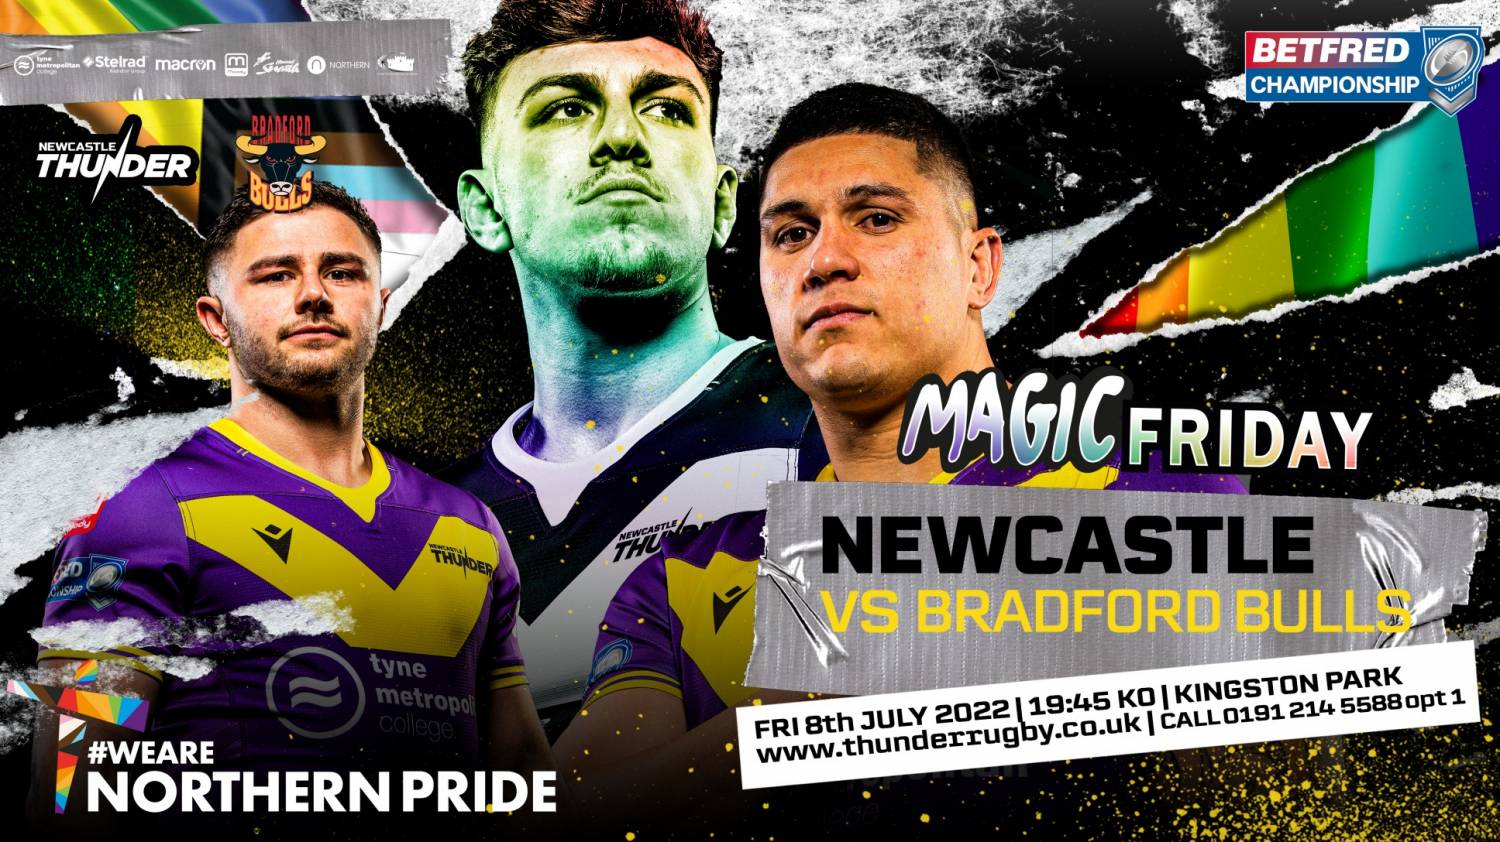 WIN WITH PRIDE - WIN VIP HOSPITALITY EXPERIENCE FOR MAGIC FRIDAY LGBT+ SPECTACULAR AT KINGSTON PARK STADIUM